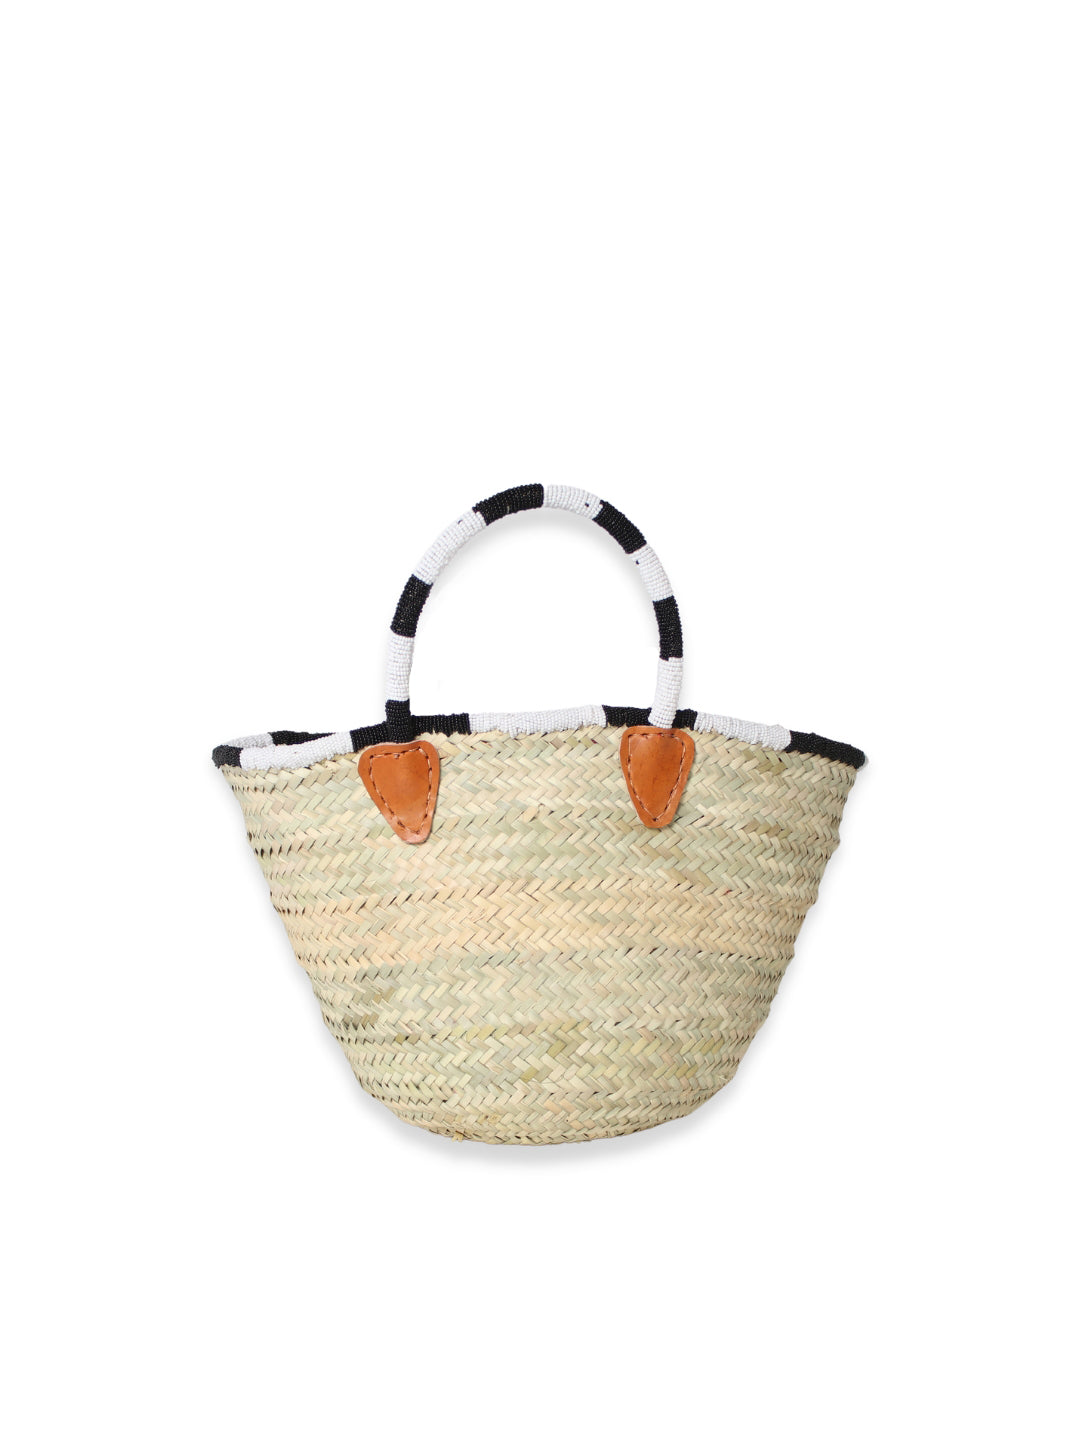 Classic hand-woven straw bags are as romantic as they are functional. With a roomy interior to easily hold all your essentials it brings resort vibes to any look during the summer. A fun touch with colourful beads makes it an instant favorite for warm beach days. Beaded basket, bag, summer basket, beach bag, fatto a mano, moda etica, borsa da spiaggia, cesta